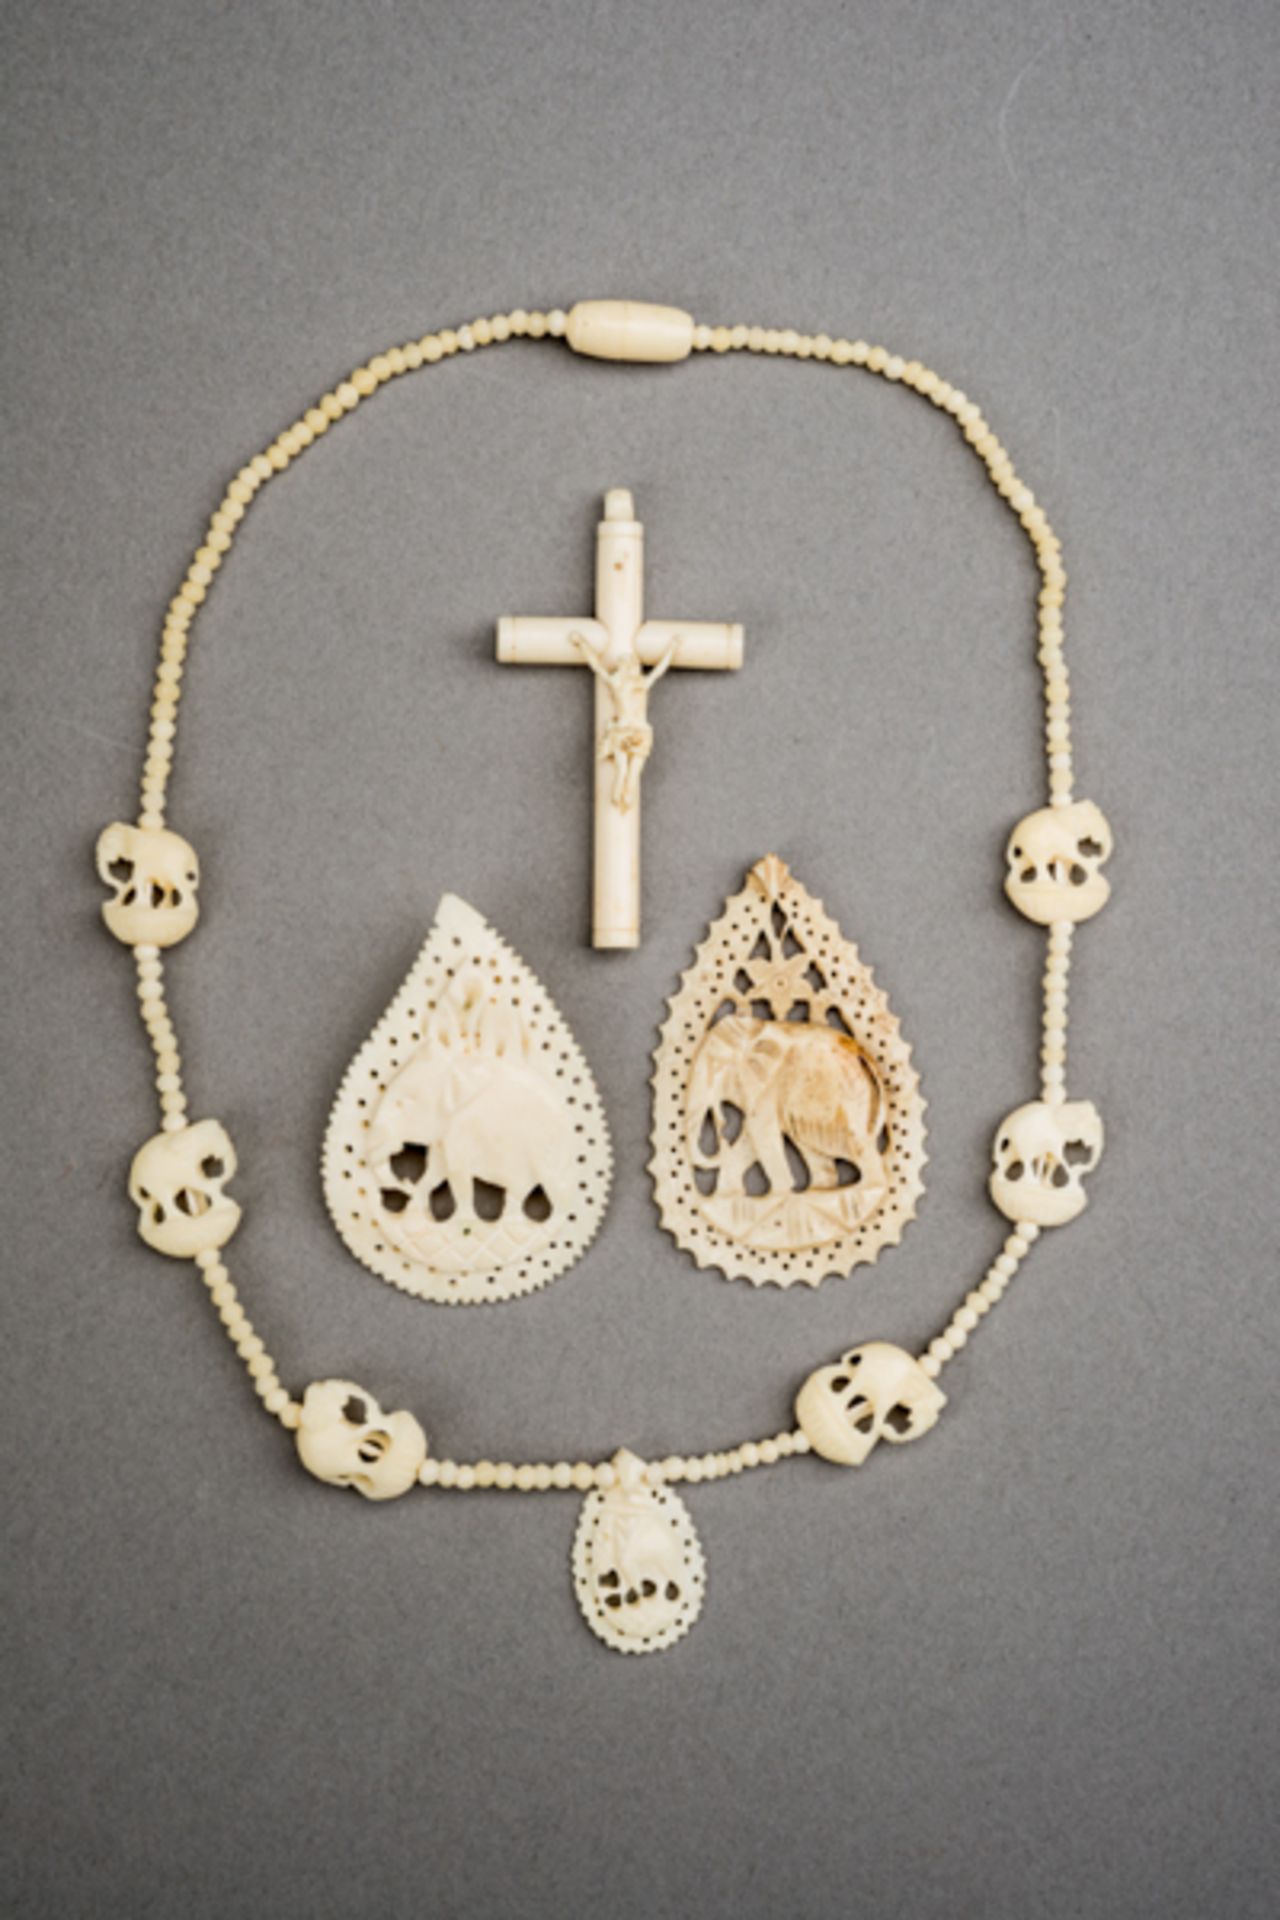 INDIAN COLONIAL IVORY JEWLERRY  Ivory. India, approx. mid 20th cent.  A necklace with ivory beads